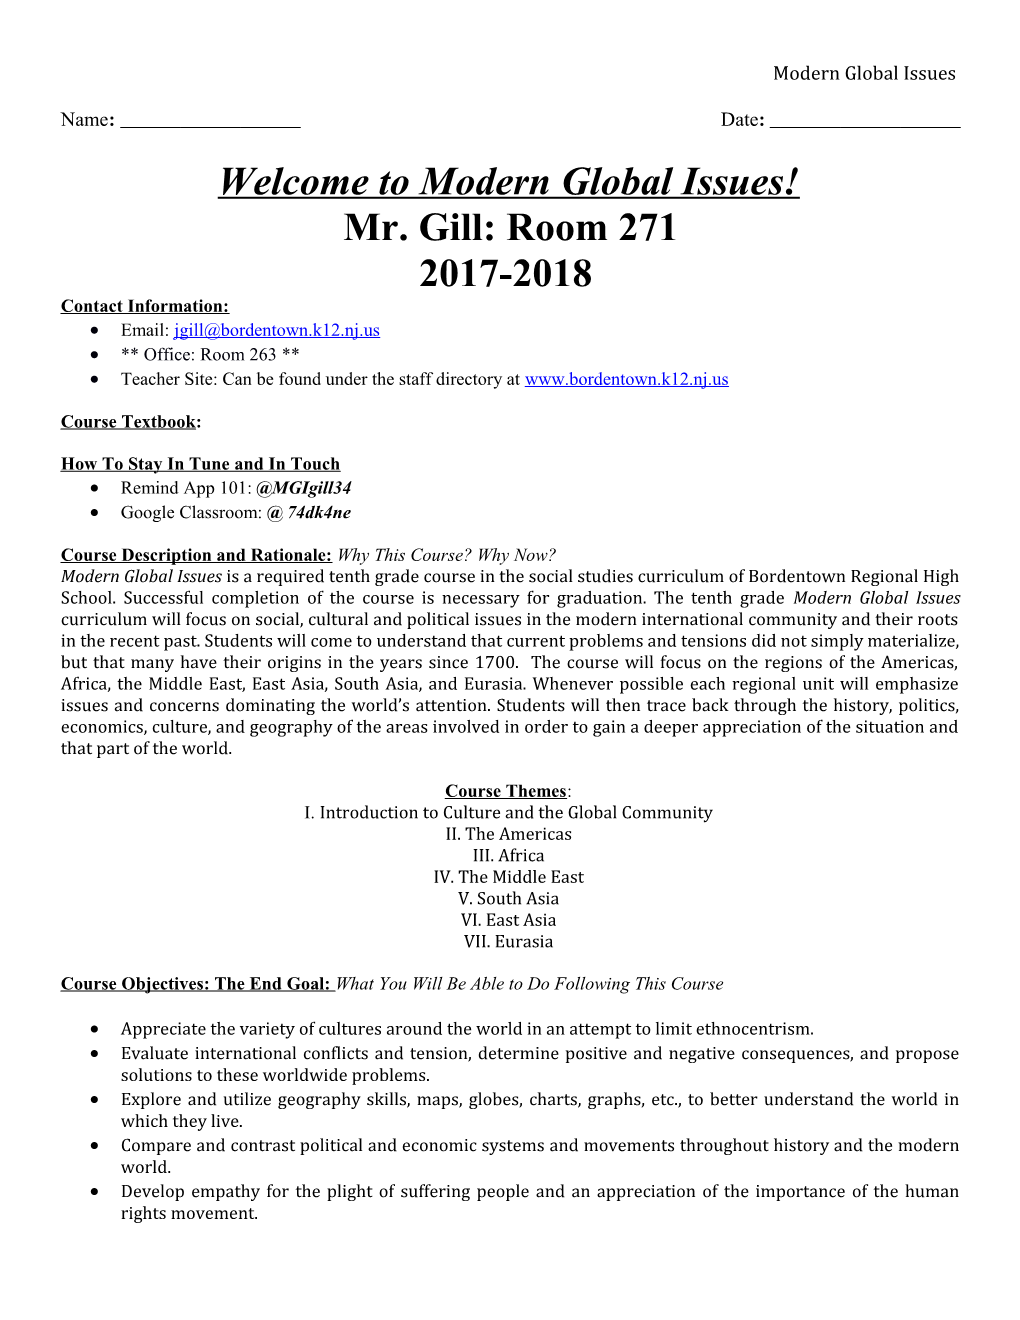 Welcome to Modern Global Issues!